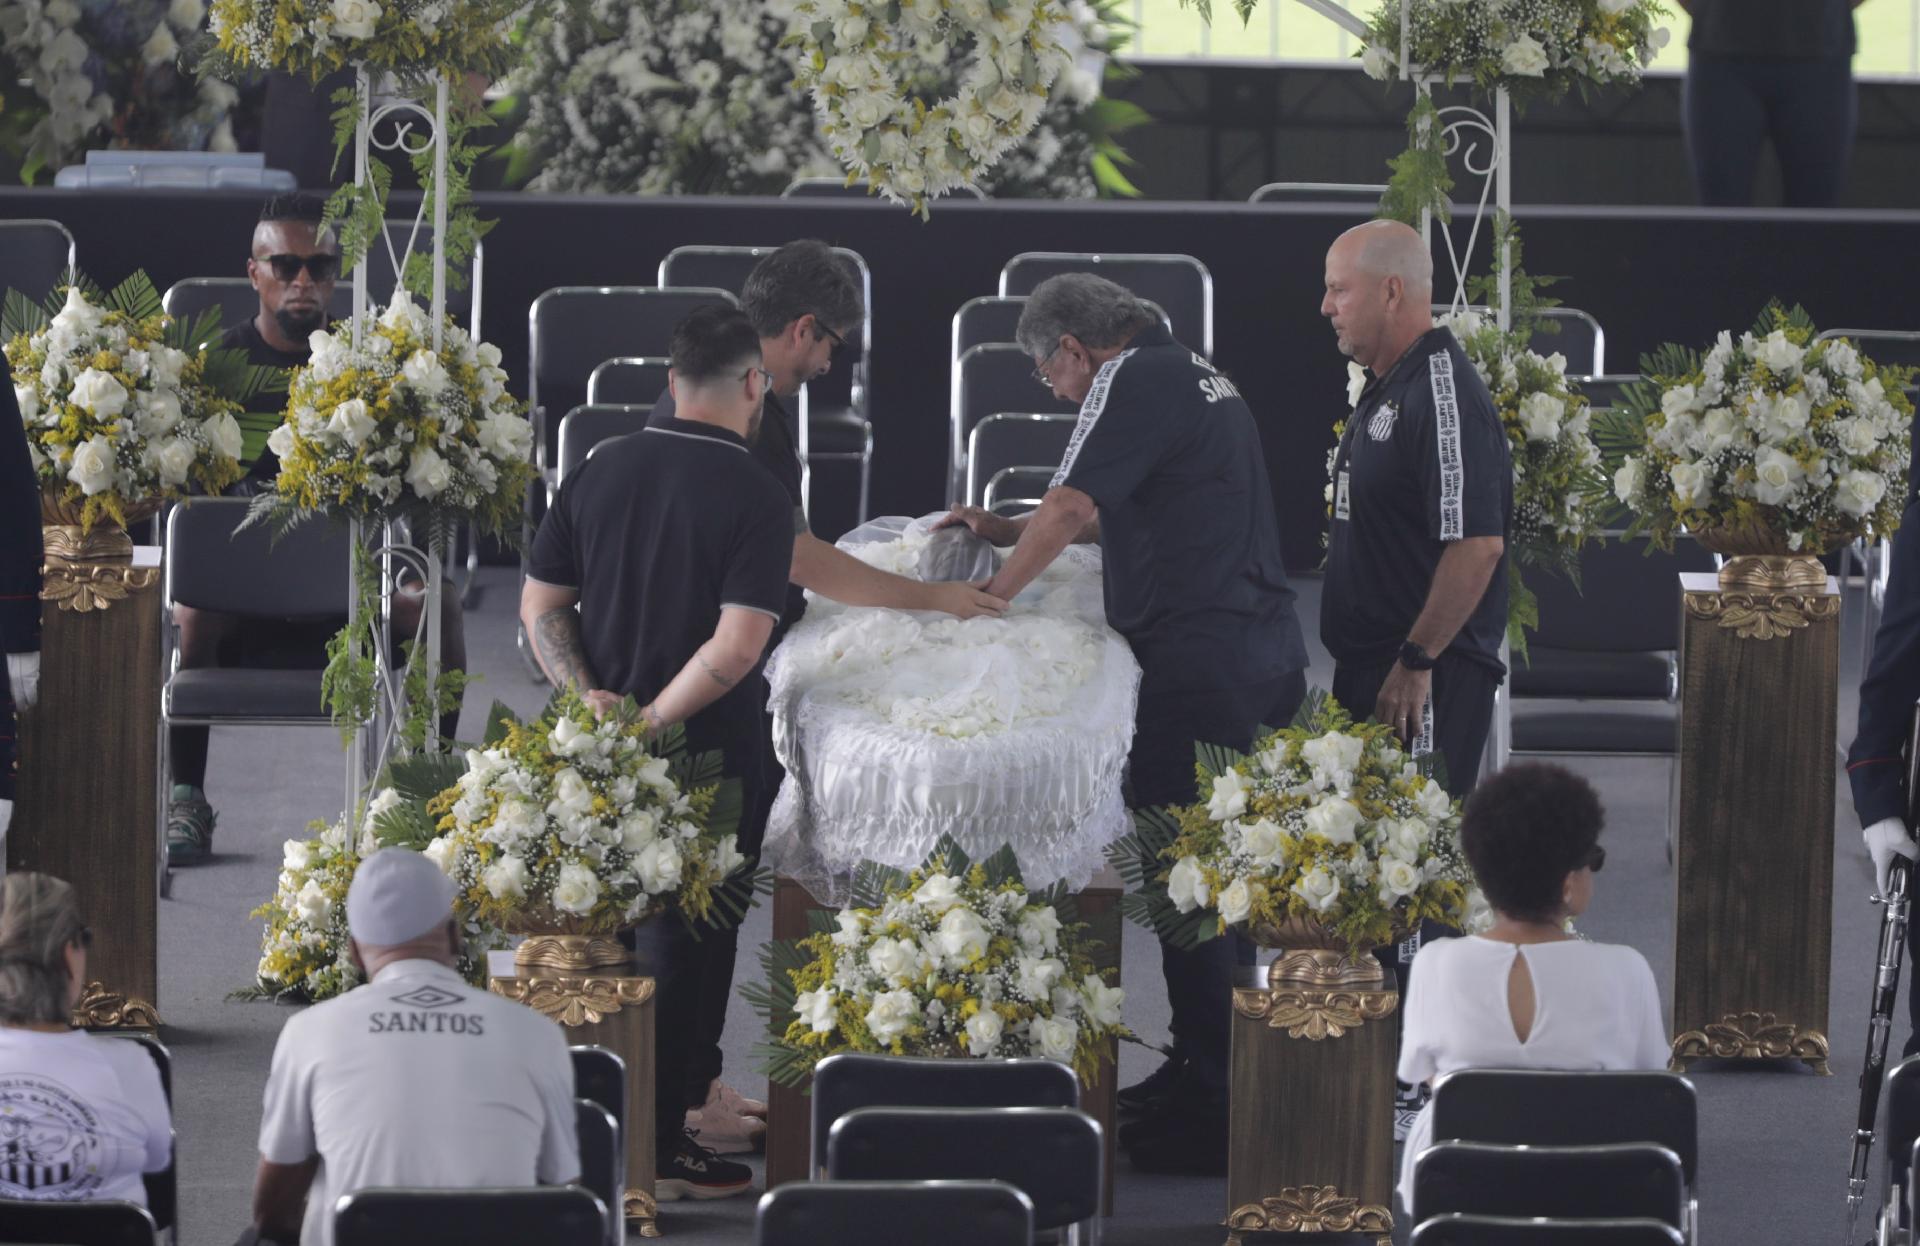 Former Santos player Manuel Maria is taken to see the coffin of King Pele - Marcelo Justo / UOL